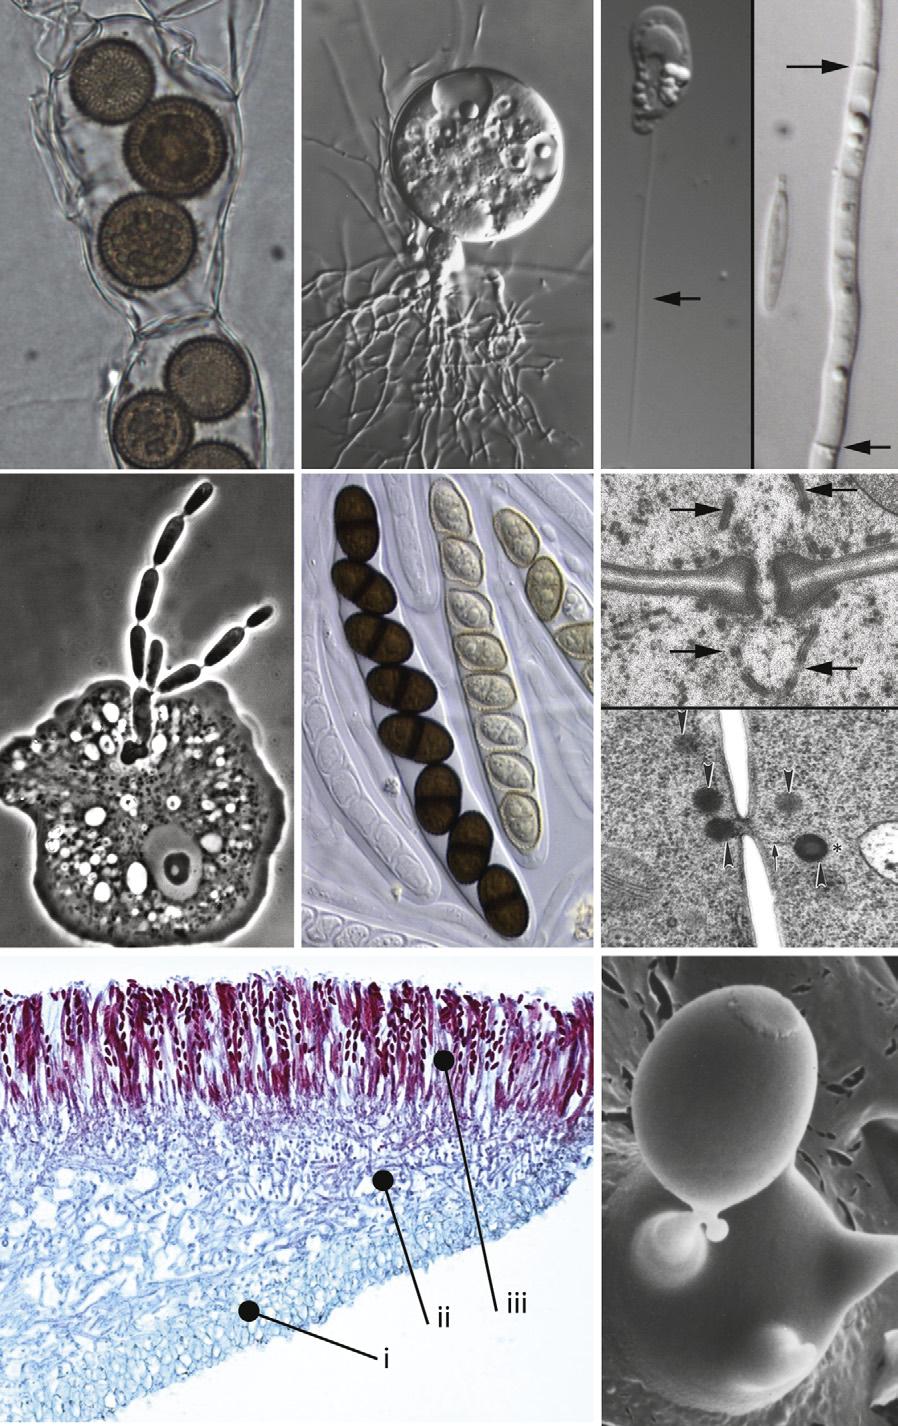 Magazine R843 Figure 2. Cellular structures of unicellular and multicellular fungi. (A) Rozella allomycis resistant sporangia formed inside hyphae of the host Allomyces sp. (Photomicrograph from T.Y.